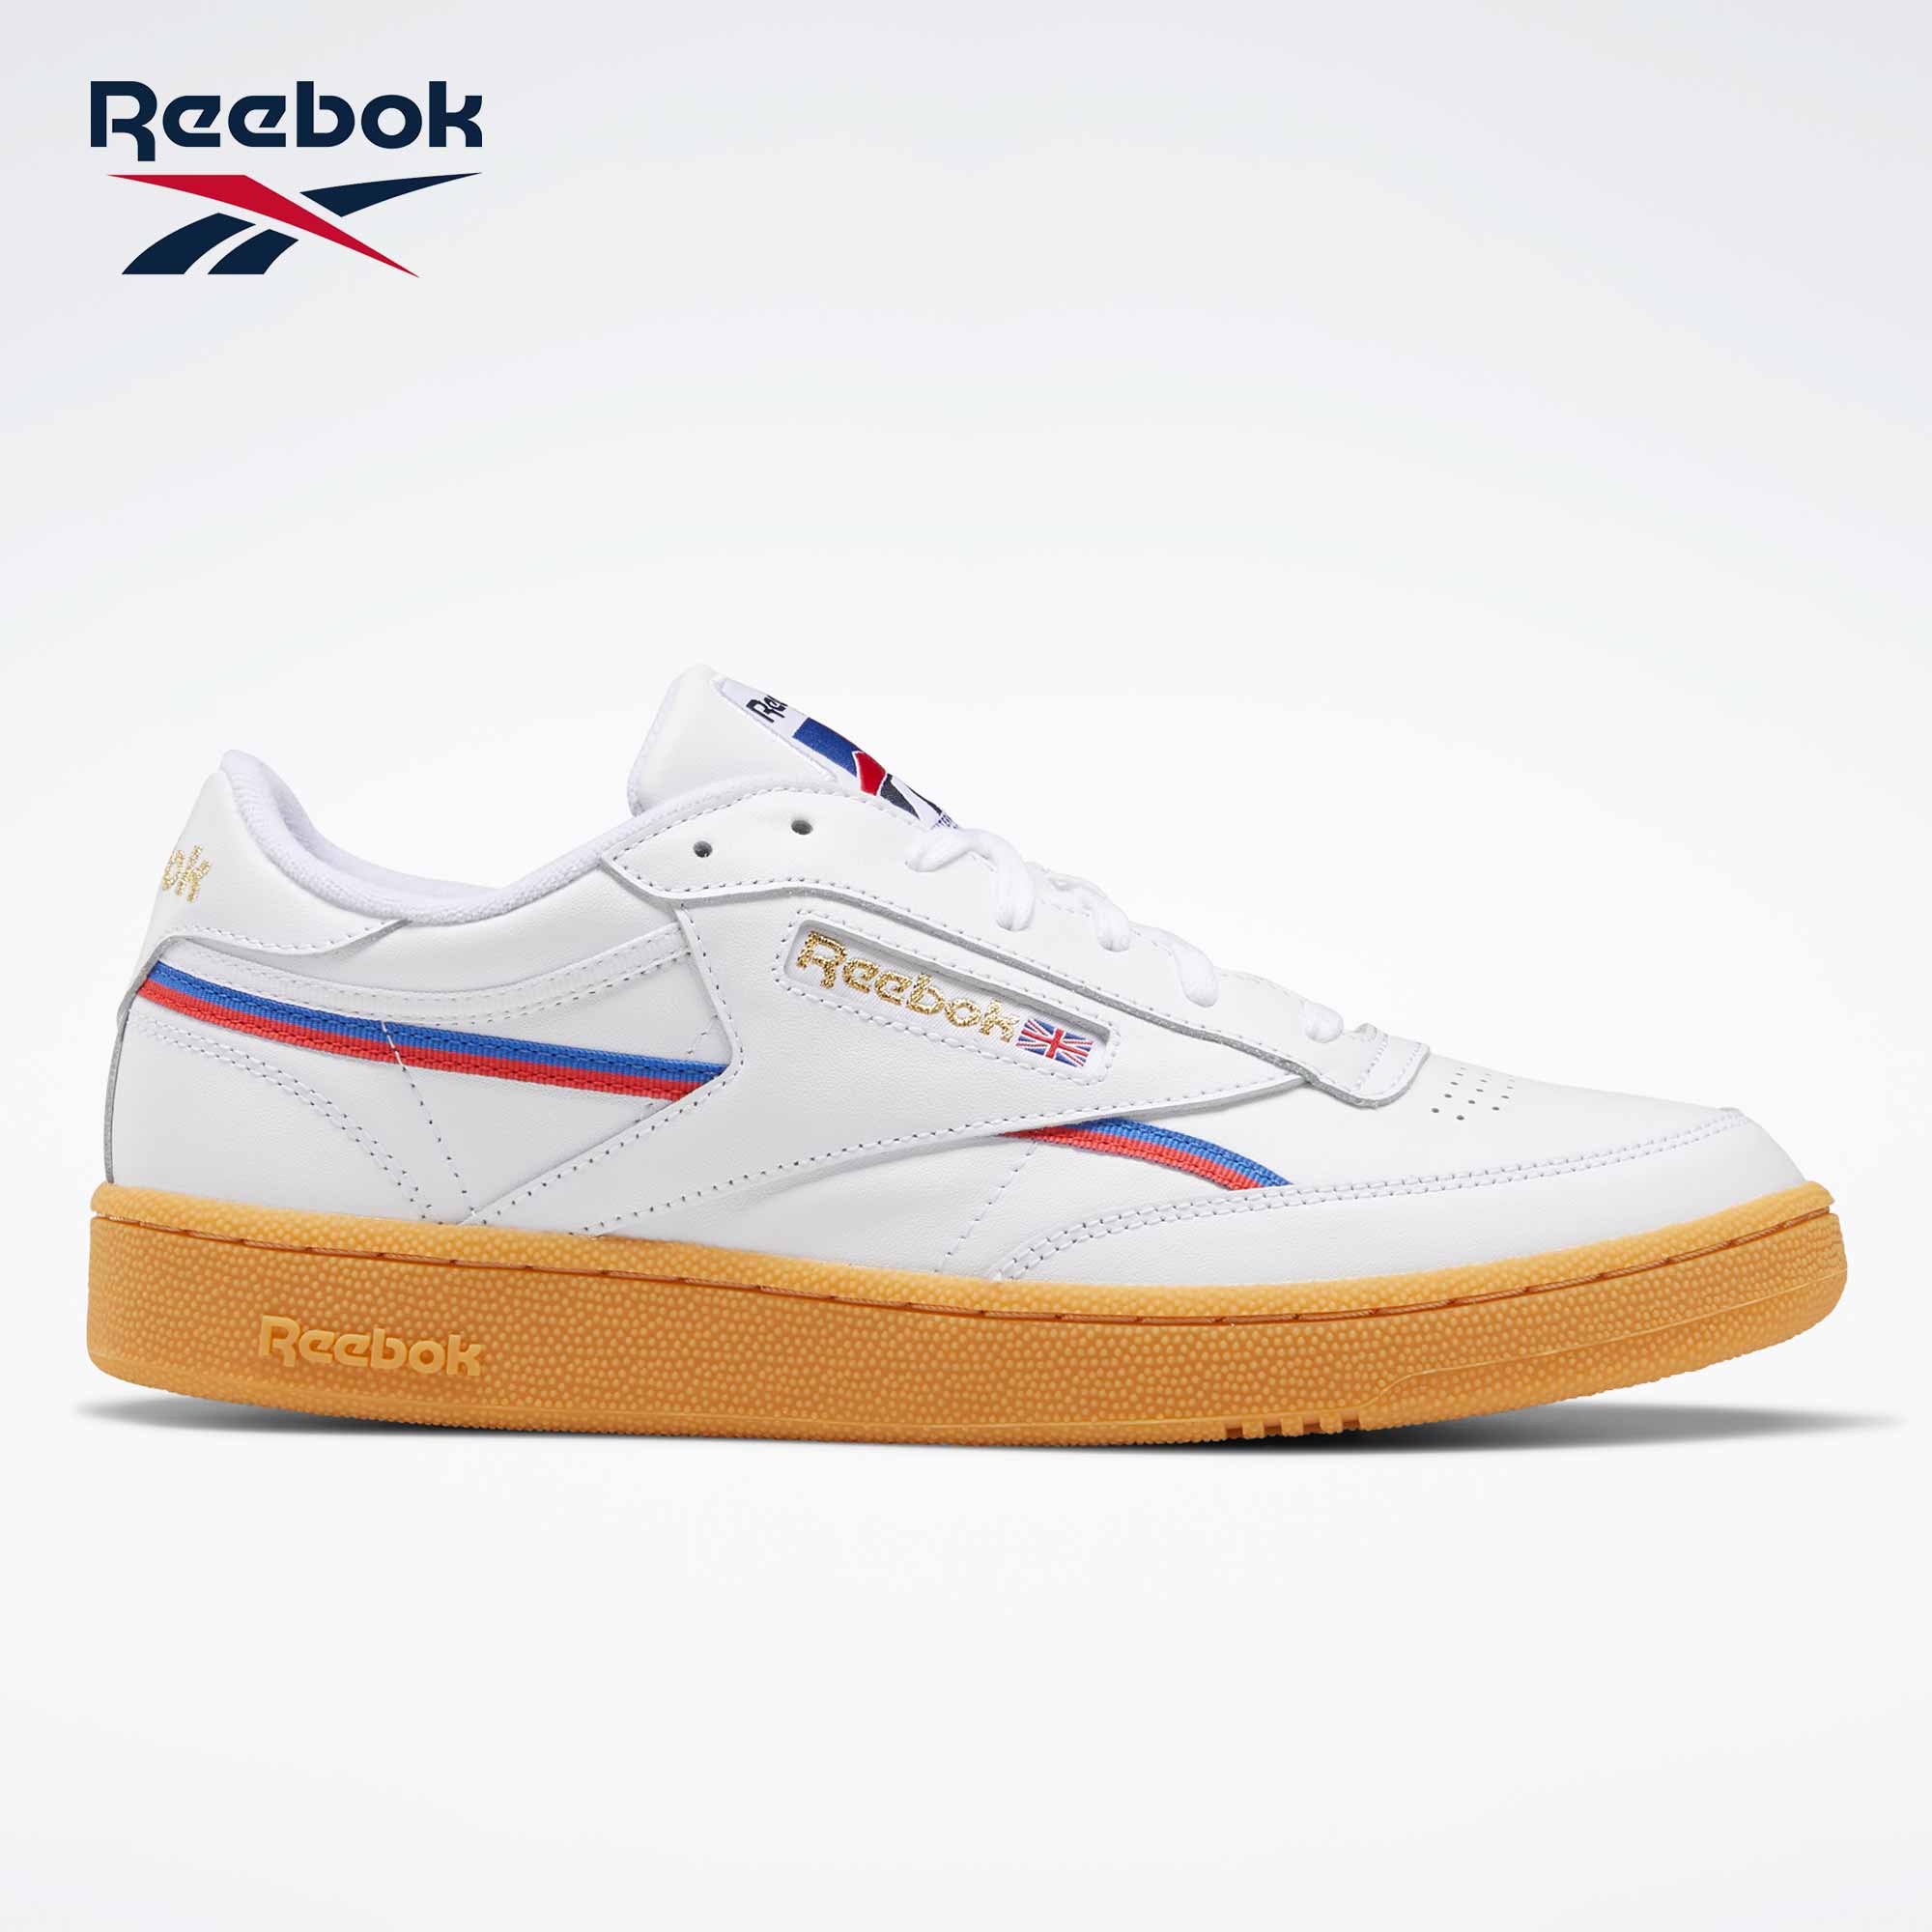 Buy Reebok Top Products Online at Best 